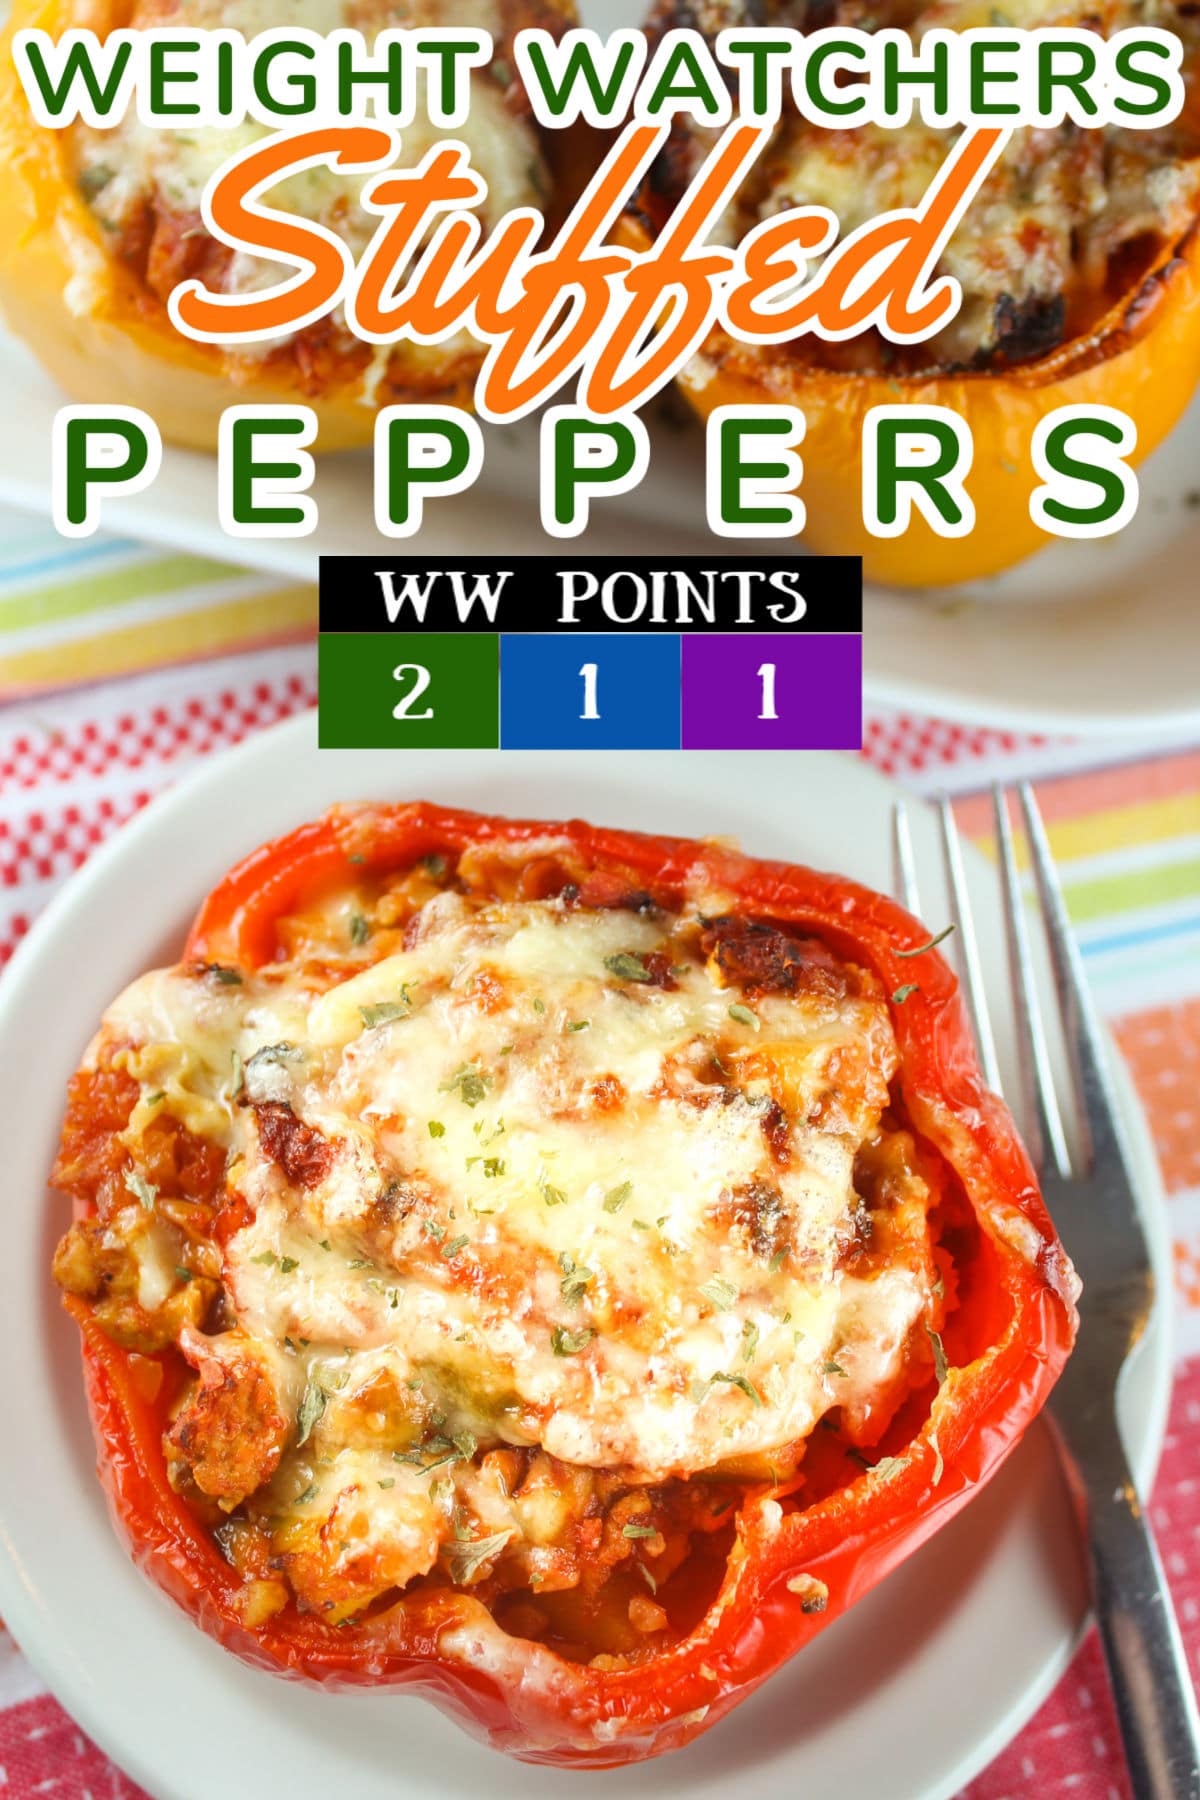 These Weight Watchers Stuffed Peppers are stuffed full with ground turkey and veggies. You won't believe that 1 1/2 peppers are only 1-2 points and they are delicious! via @foodhussy